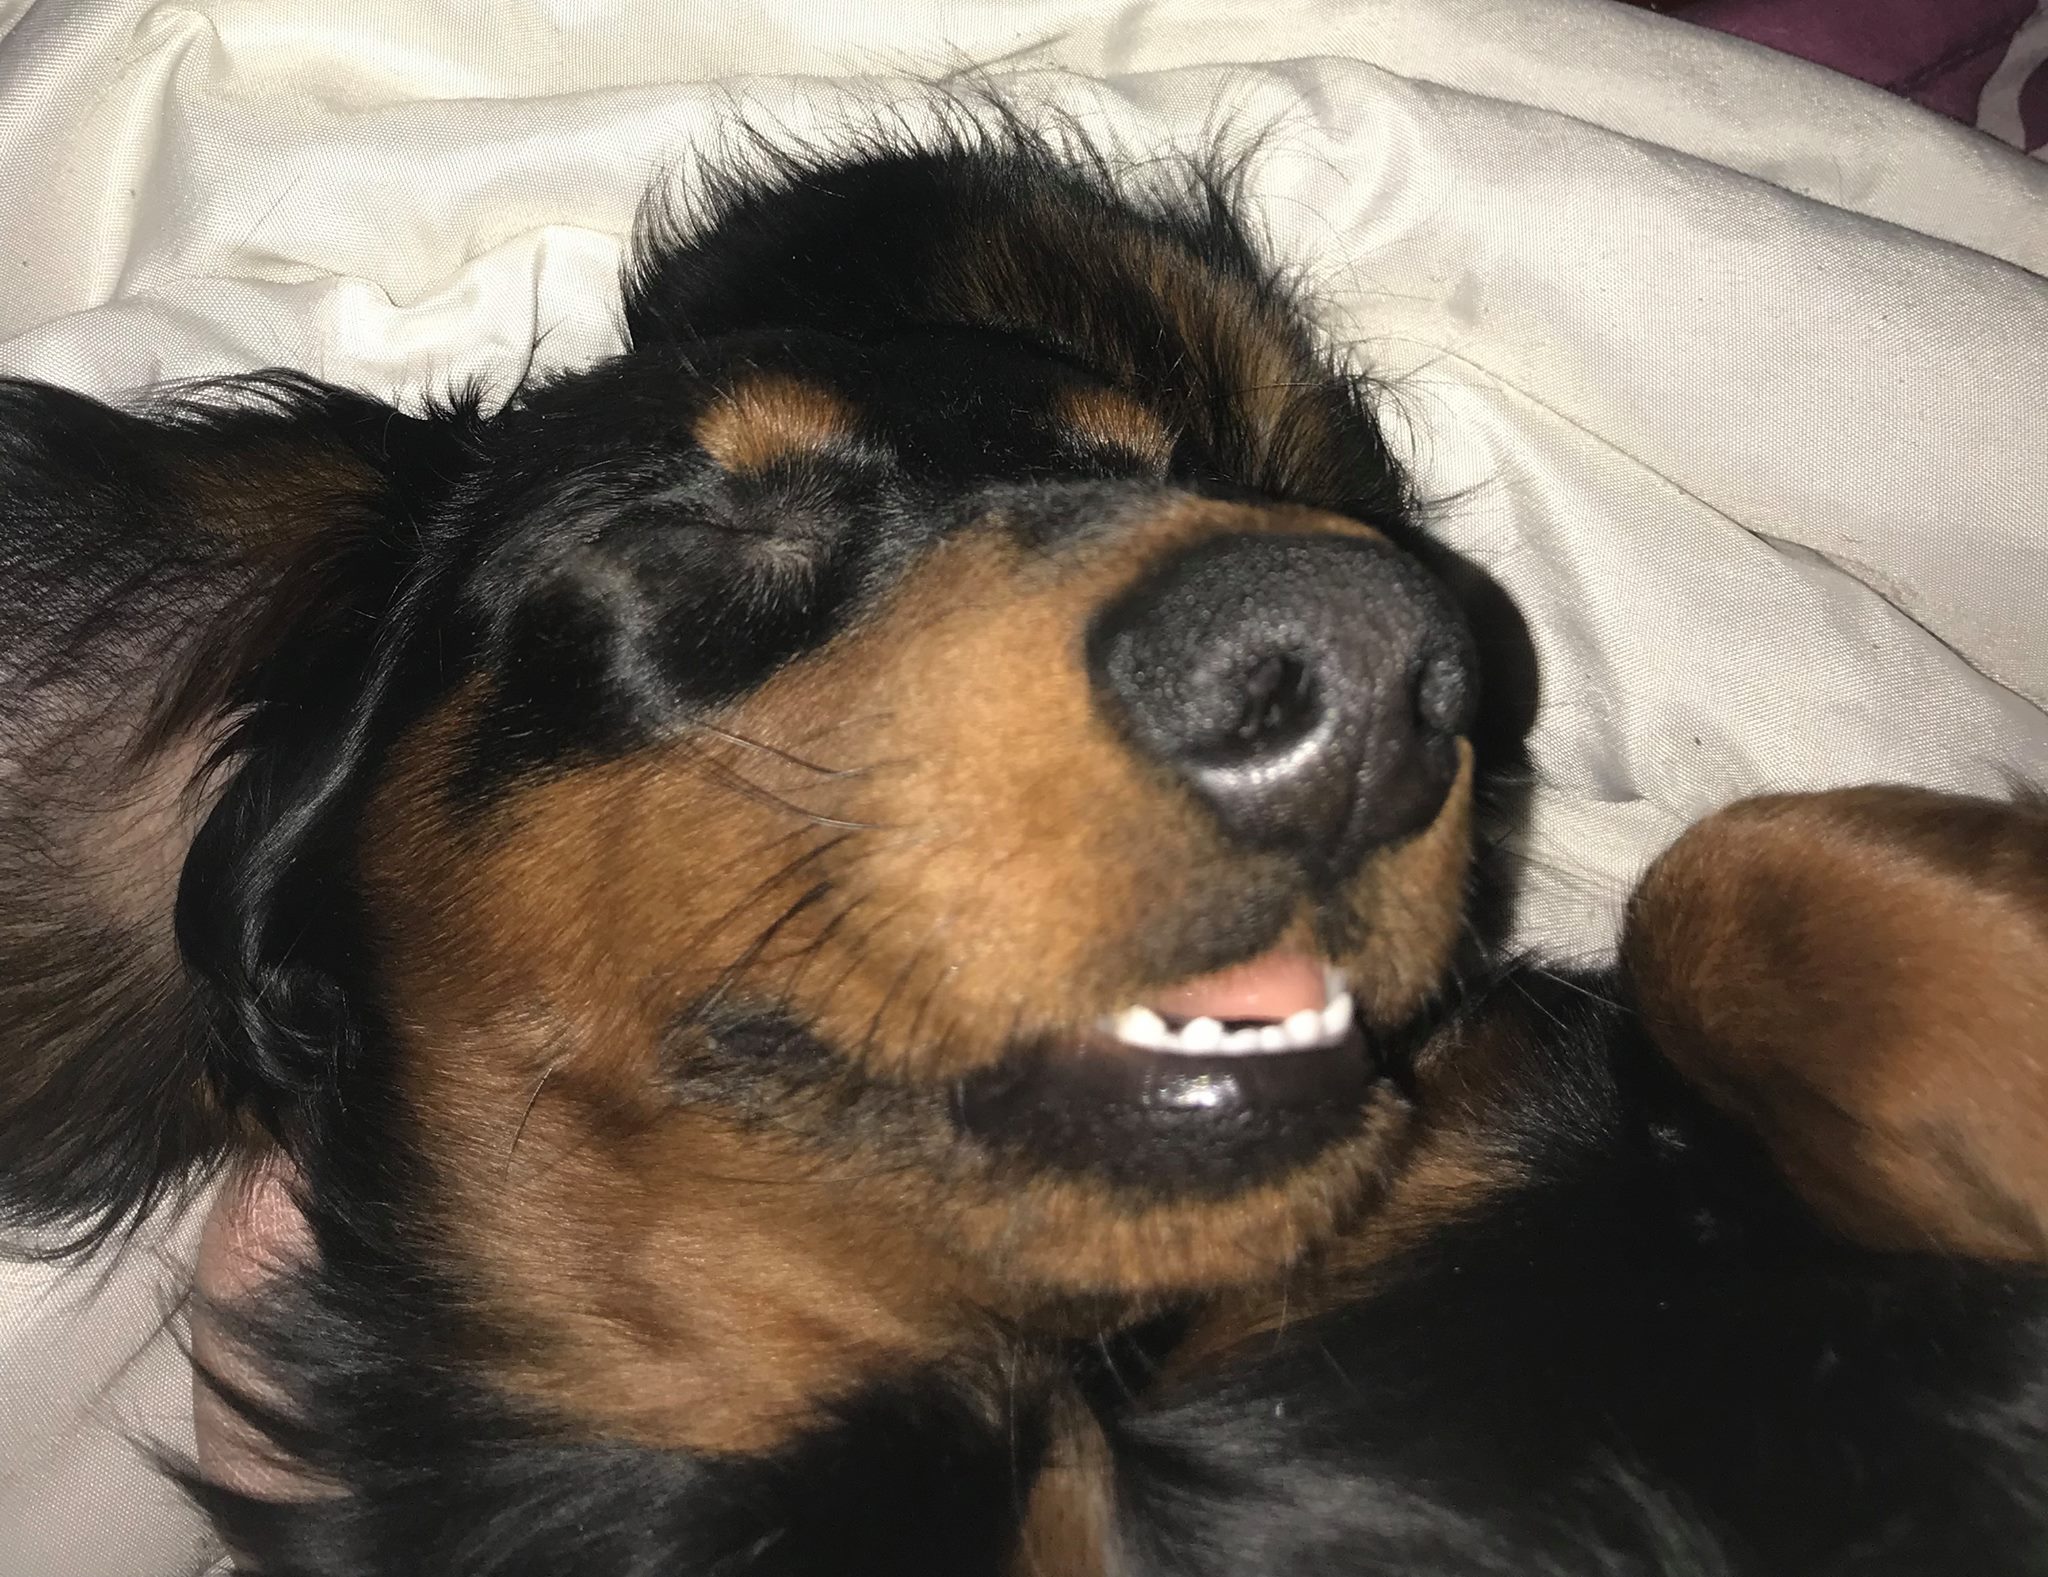 A Dachshund sleeping on its bed while smiling